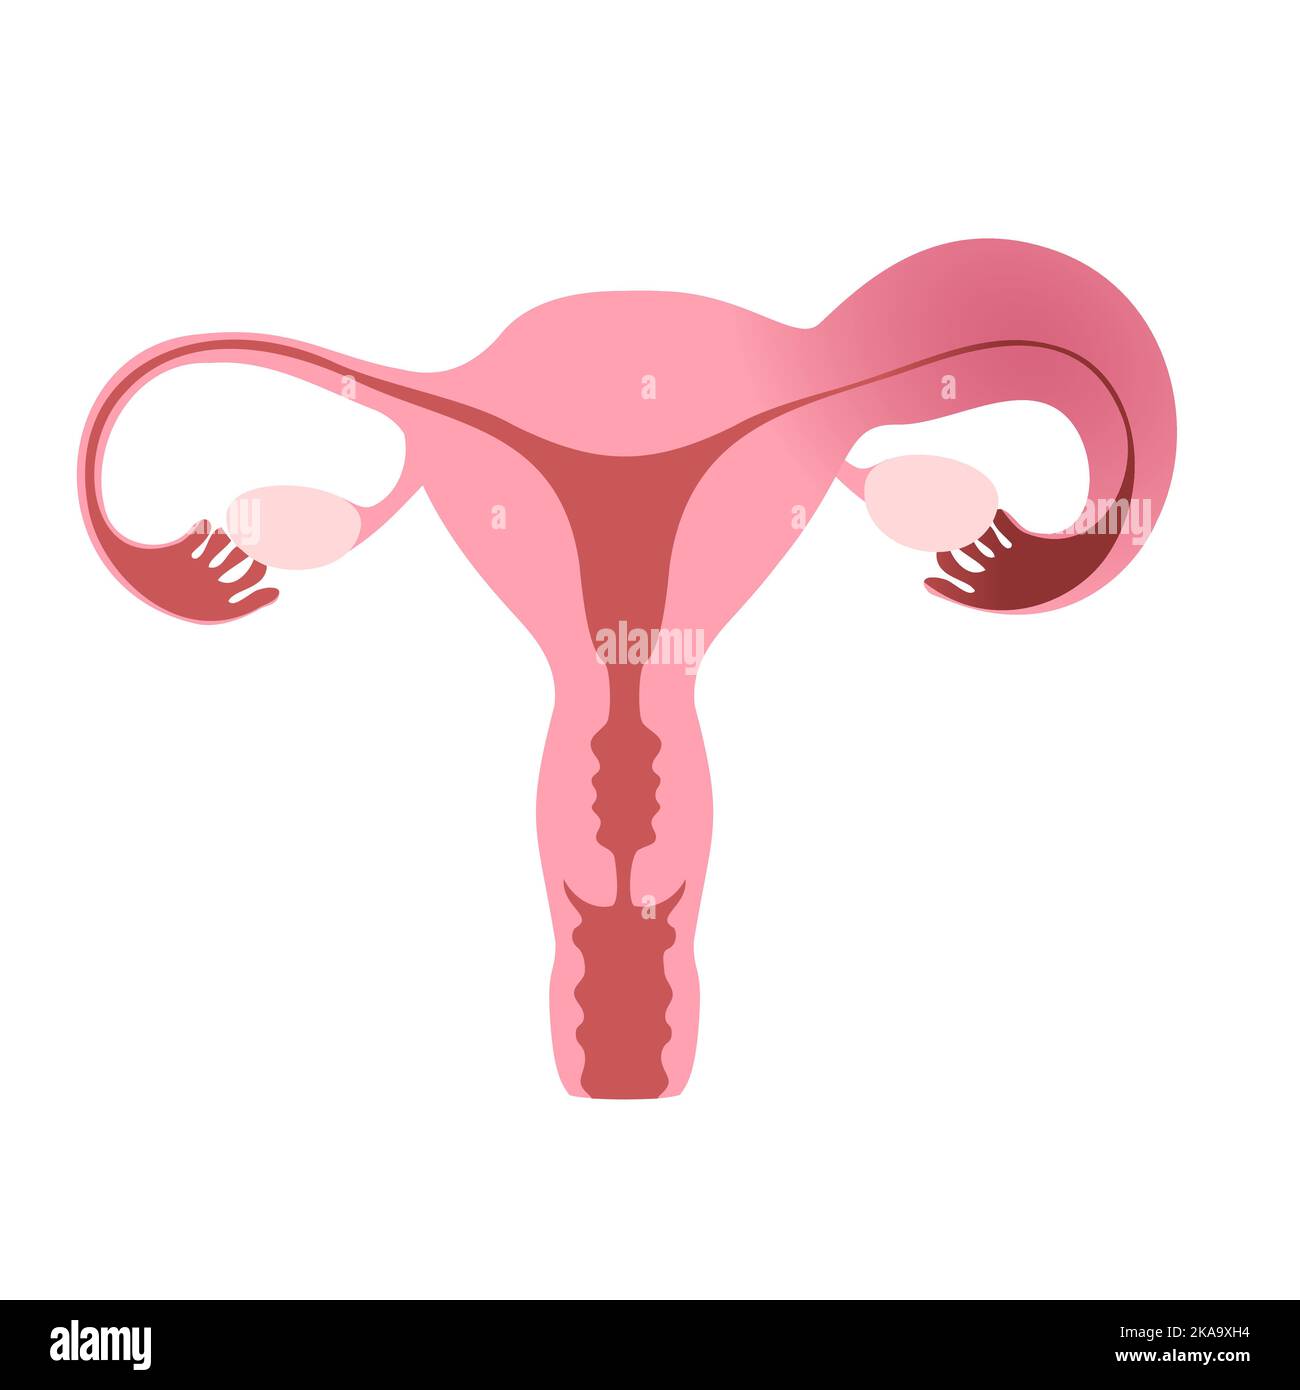 Flat illustration of human uterus demonstrating one healthy and one inflamed fallopian tube. Stock Vector